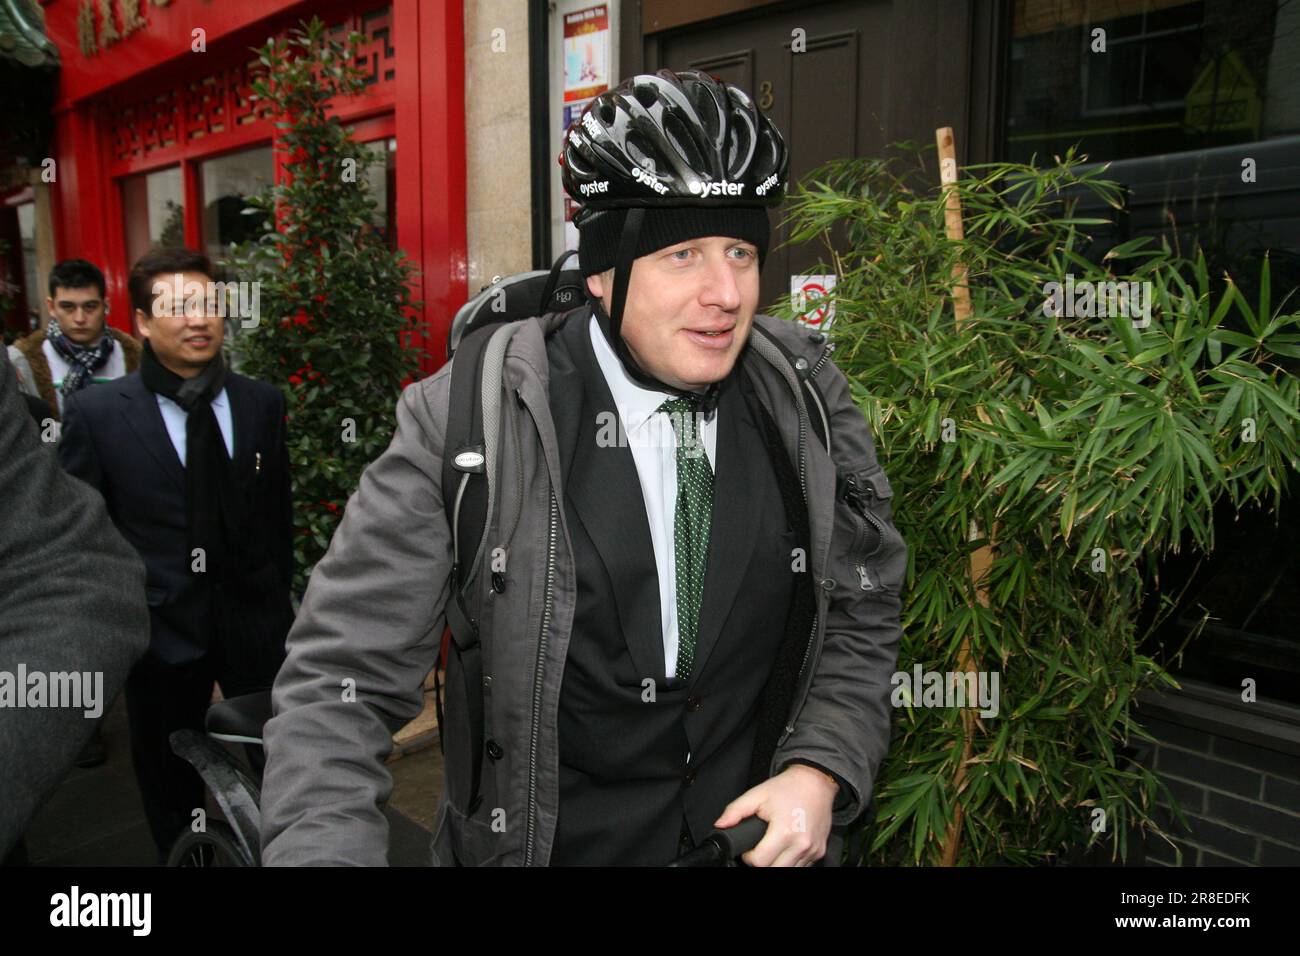 London Mayor Boris Johnson in his cycling gear in Chinatown in central London Stock Photo